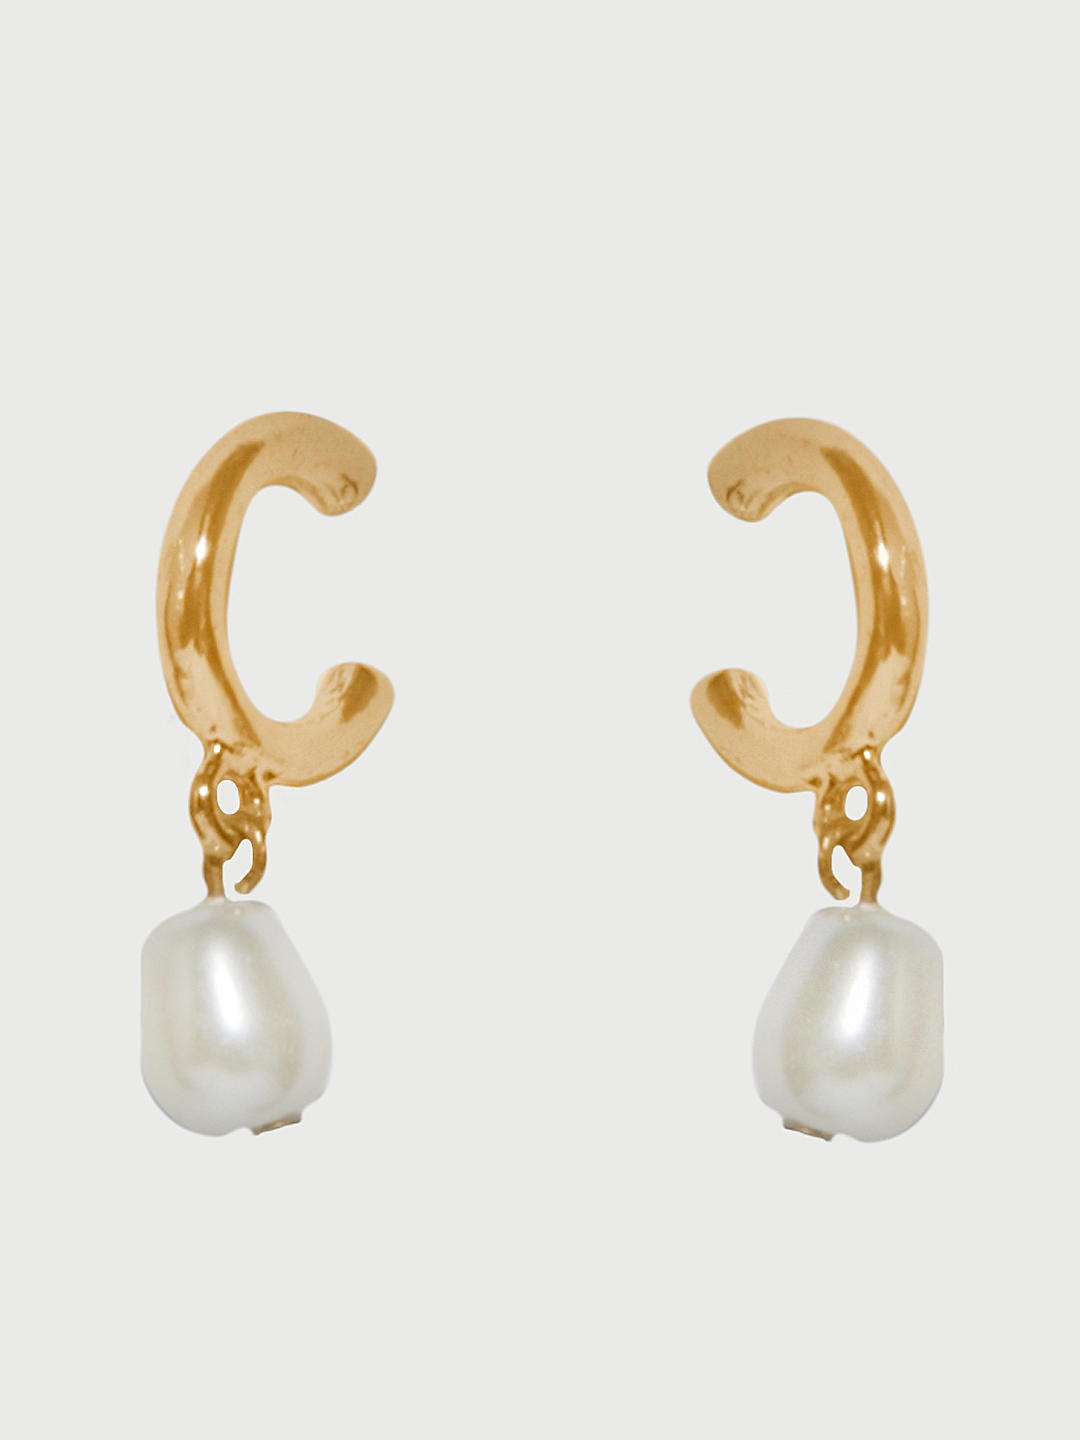 Sri Jagdamba Pearls Dealers 22k (916) Yellow Gold and Pearl Drop Earrings  for Women, Metal Weight: 2.9 Grams : Amazon.in: Fashion